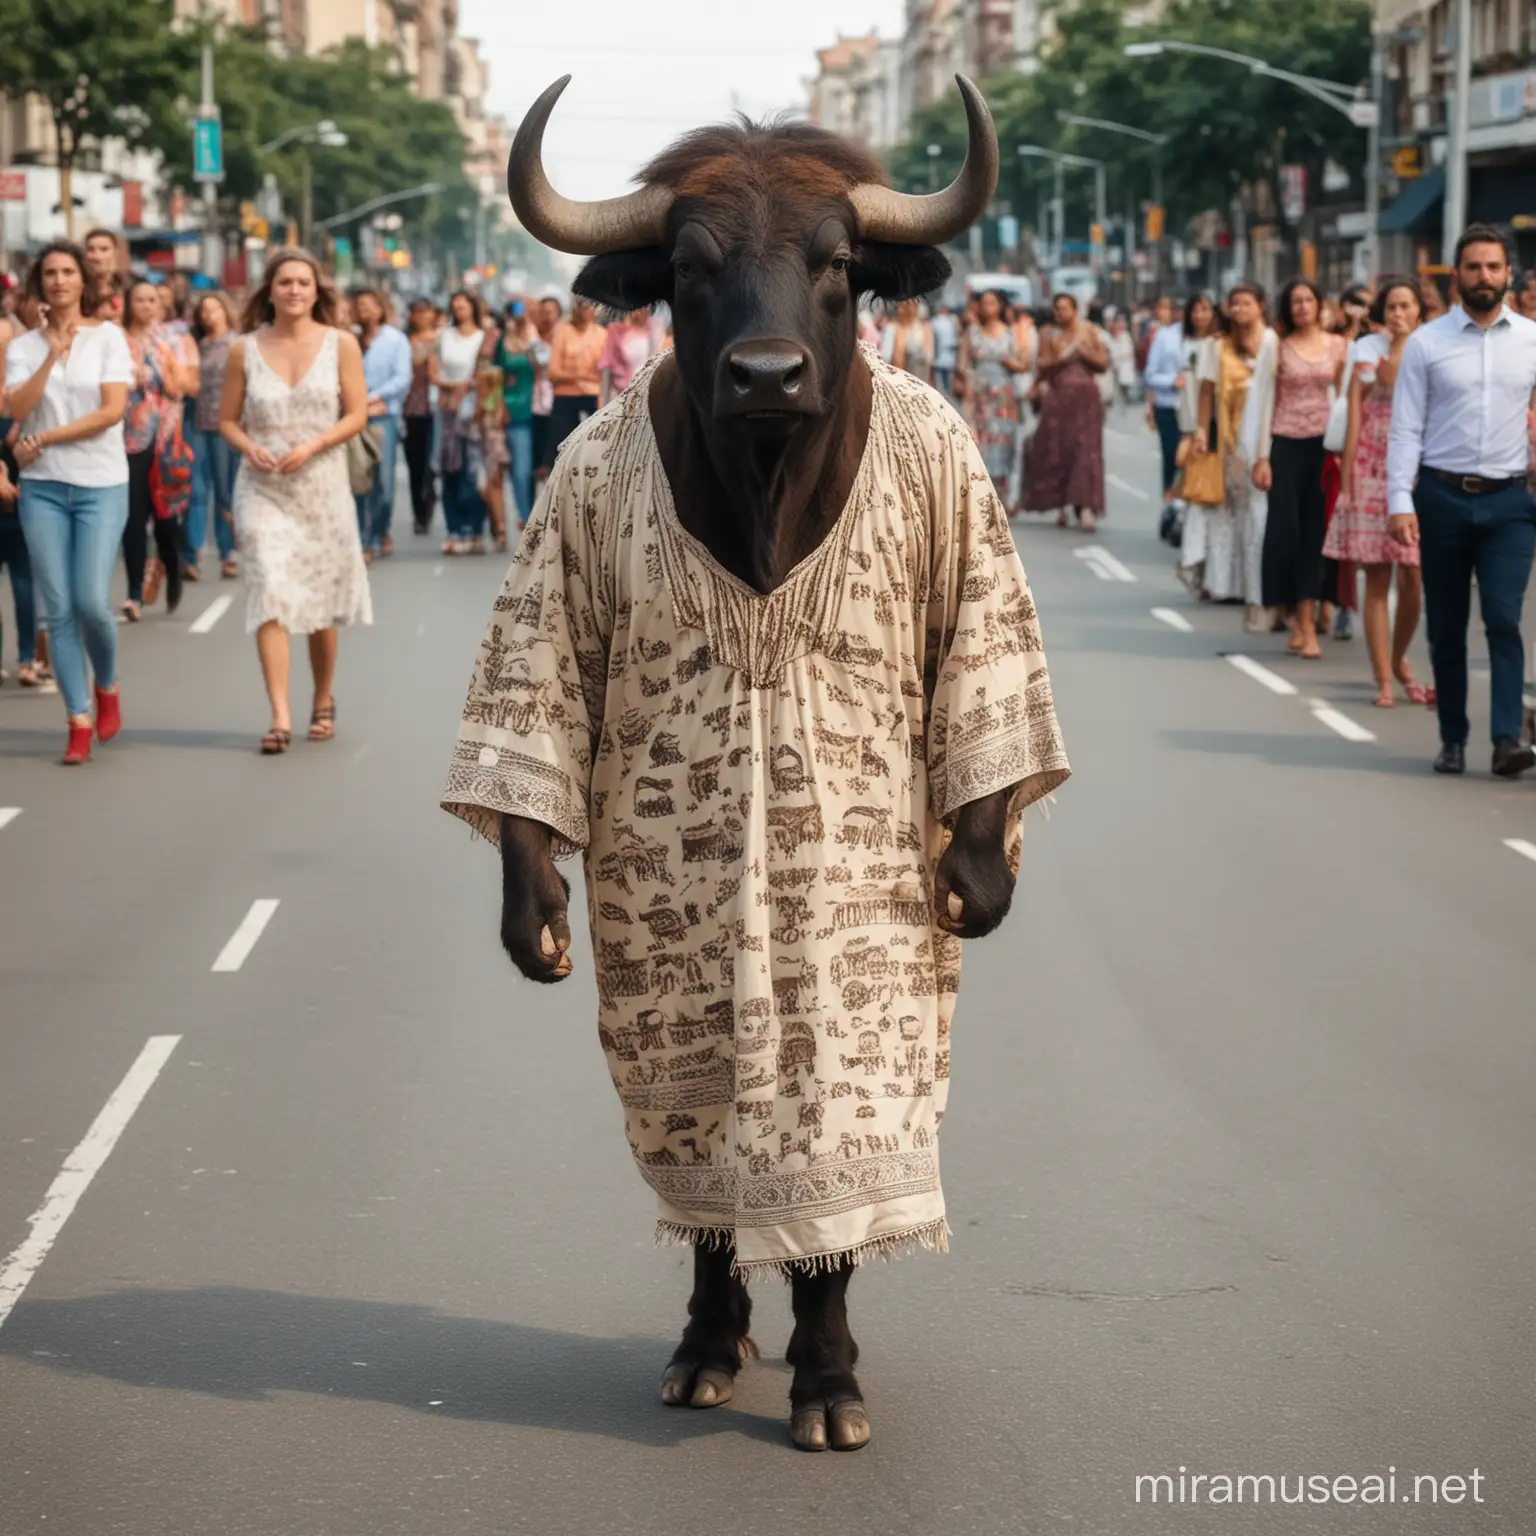 Buffalo Wearing Bridal Dress Draws Laughter from Onlookers in the Street